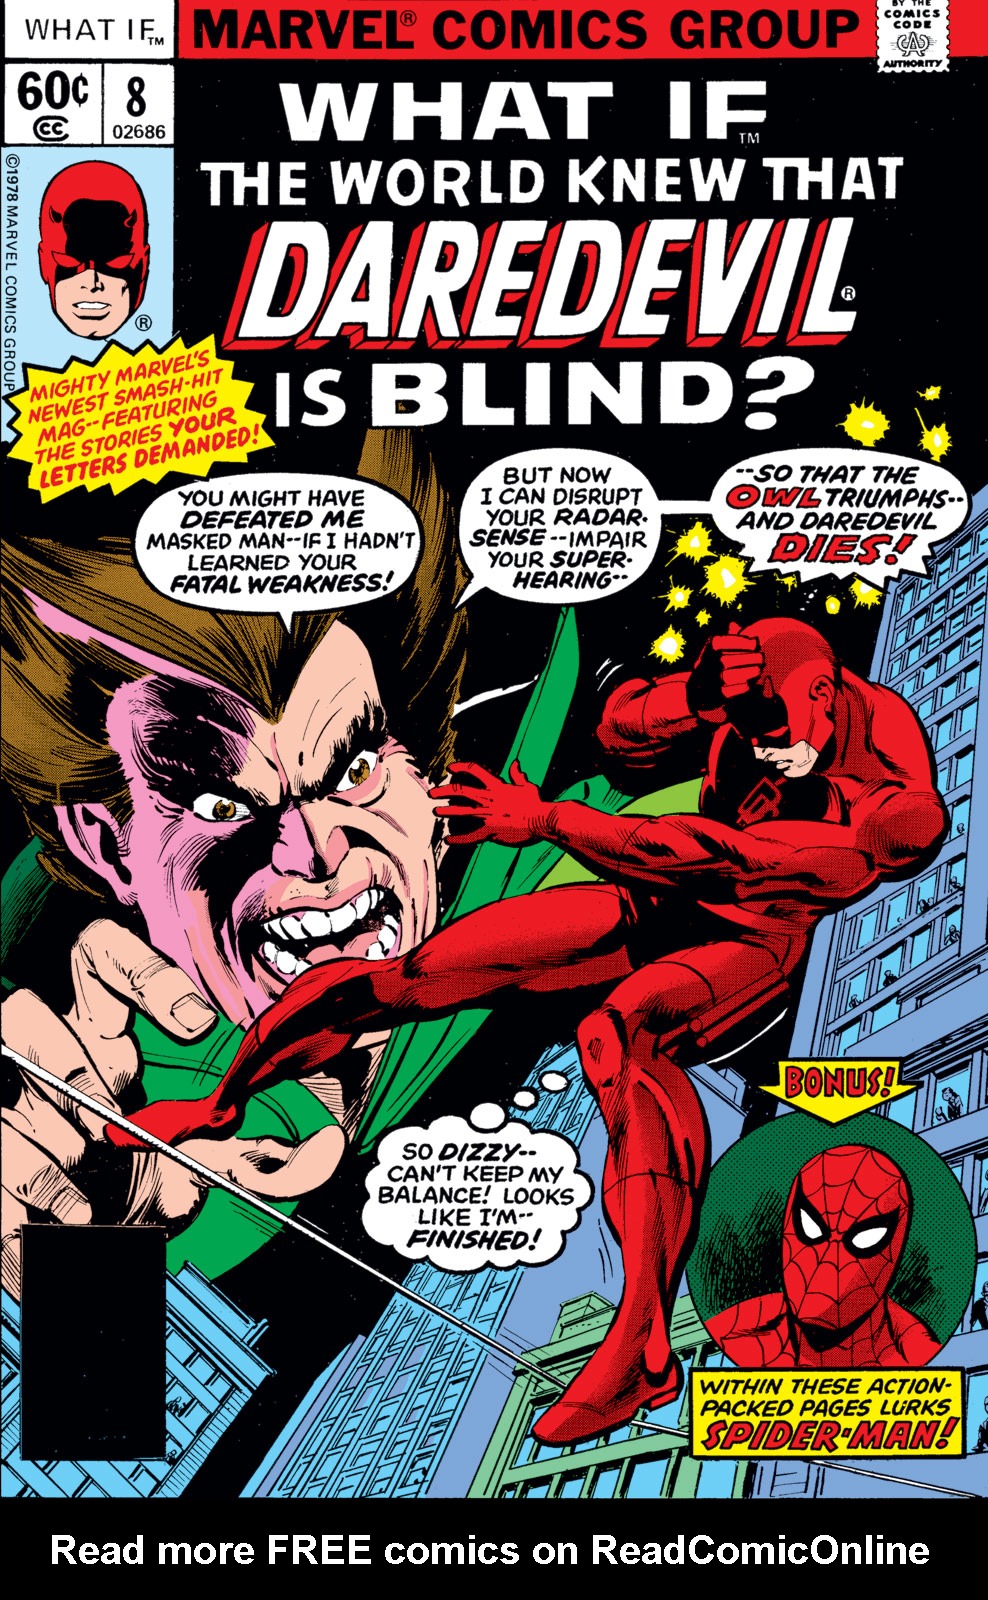 What If? (1977) issue 8 - The world knew that Daredevil is blind - Page 1